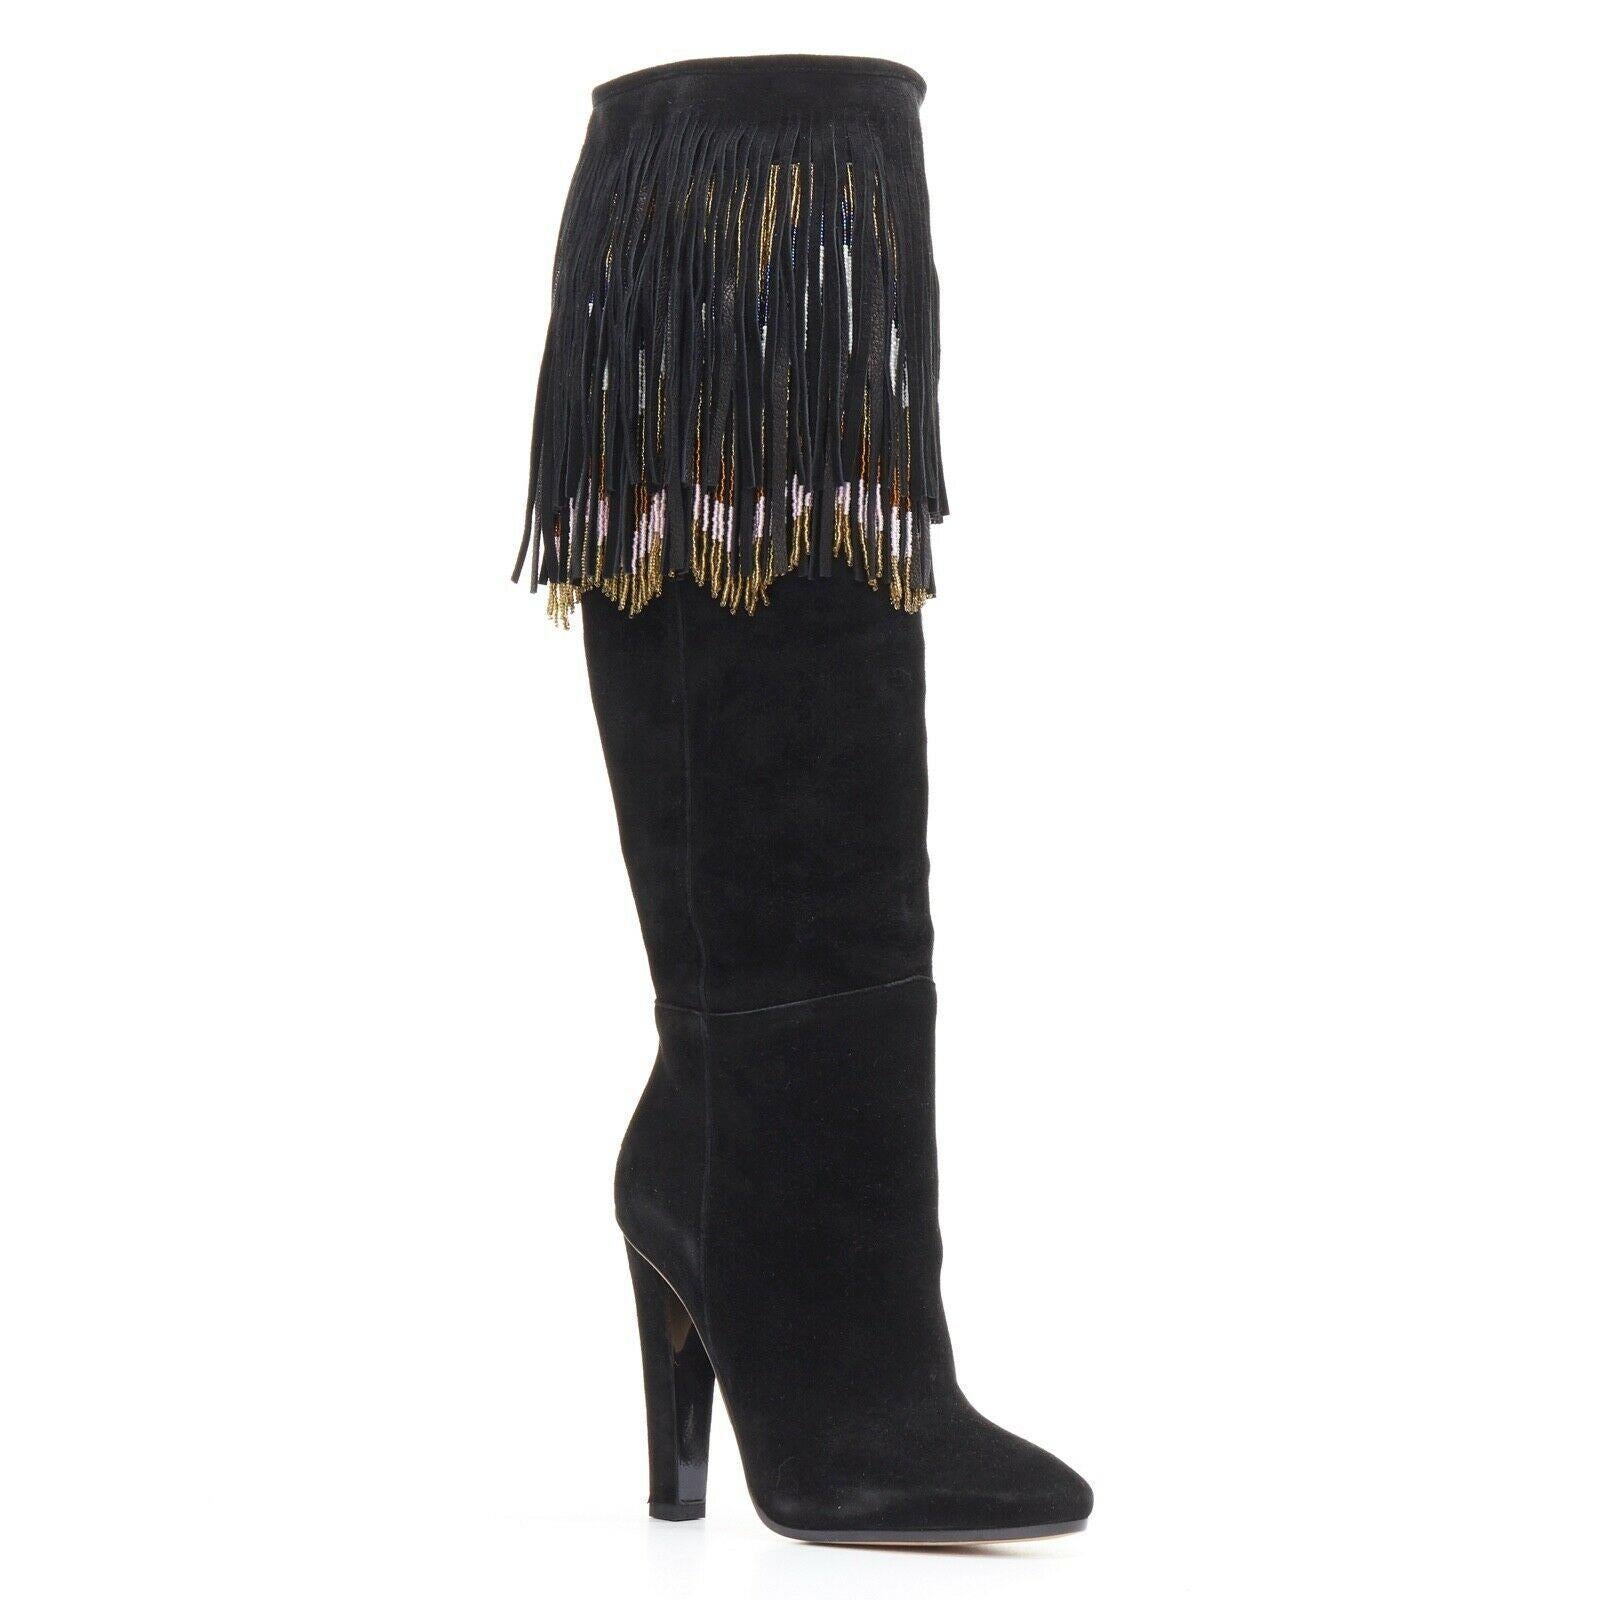 new JIMMY CHOO Bill black suede leather bohemian beaded fringe tall boots EU35.5
Designer: Jimmy Choo
Material: Leather
Color: Black
Extra Details: Bill boots. Black suede leather upper. Tonal stitching. Almond round toe. Angular high heel.